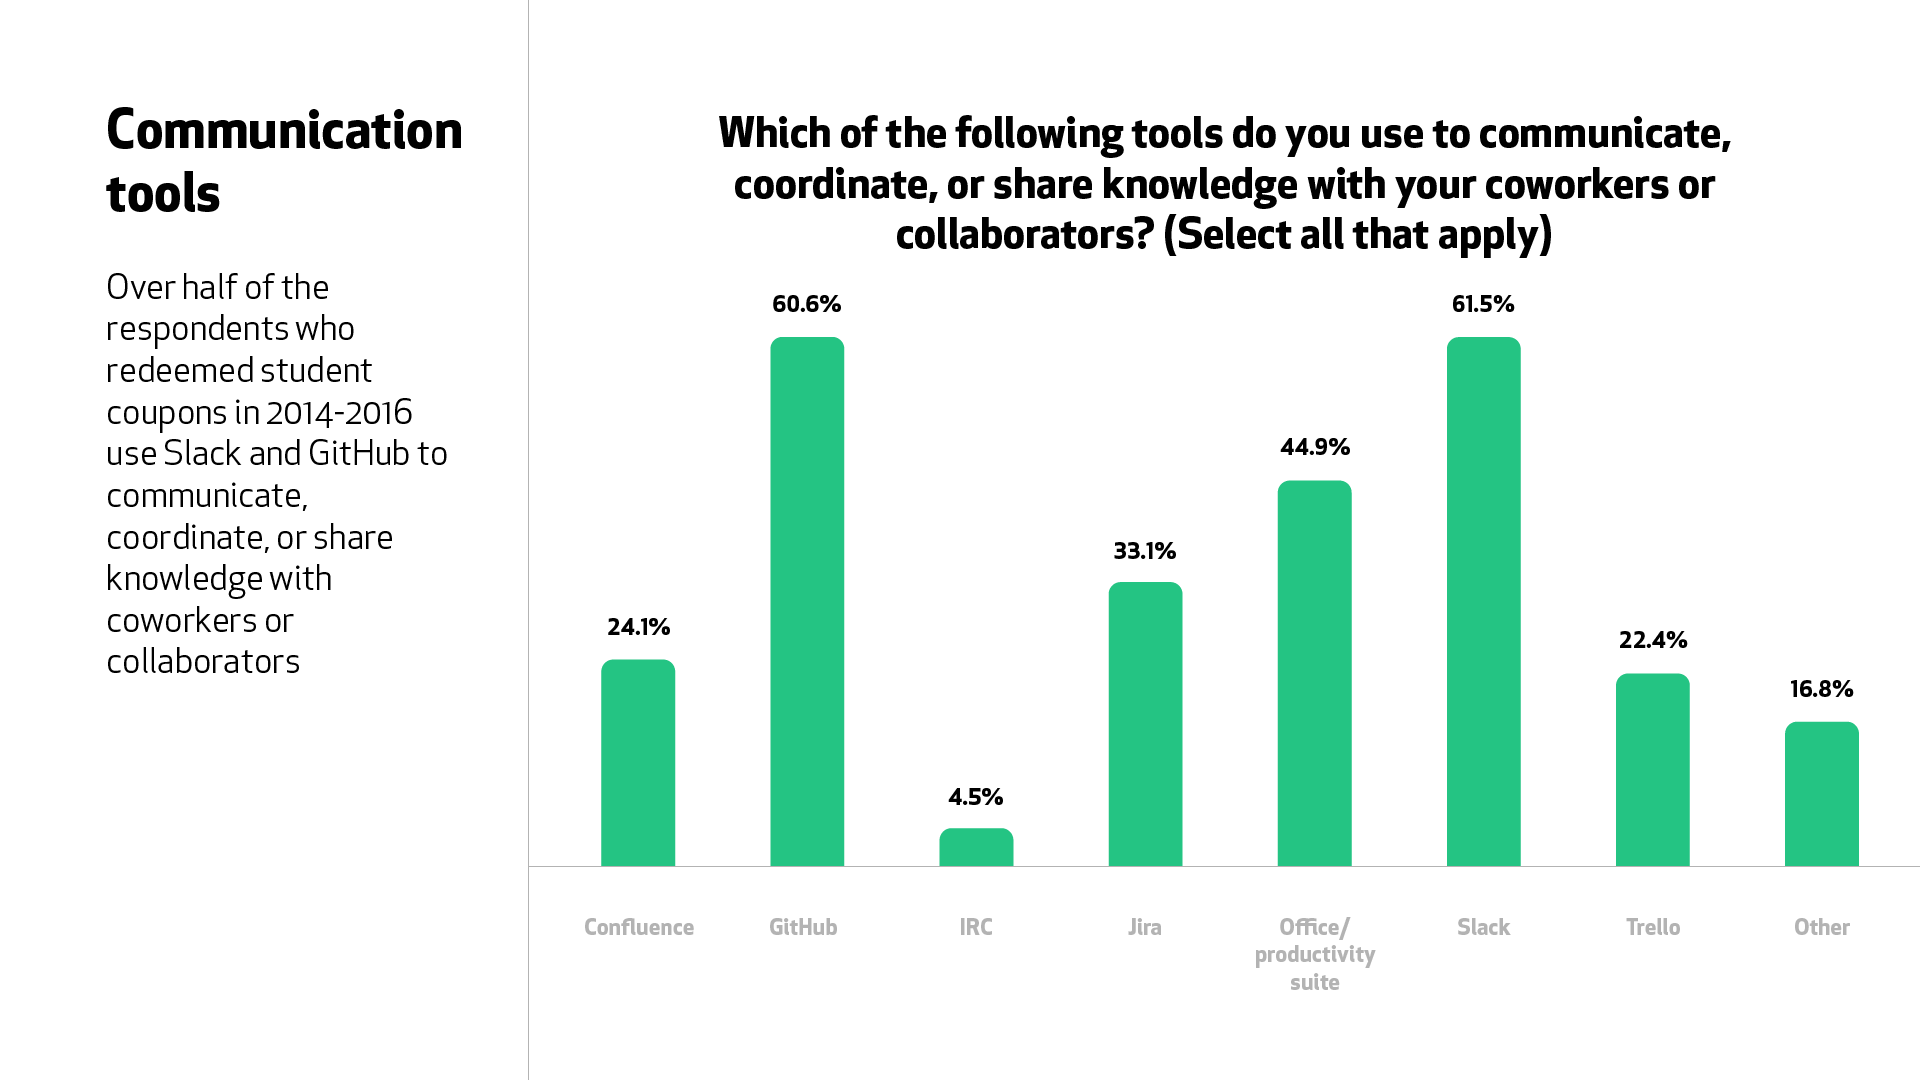 A graph for the question “Which of the following tools do you use to communicate, coordinate, or share knowledge with your coworkers or collaborators?” Over half of respondents use Slack (61.5%) and GitHub (60.6%).